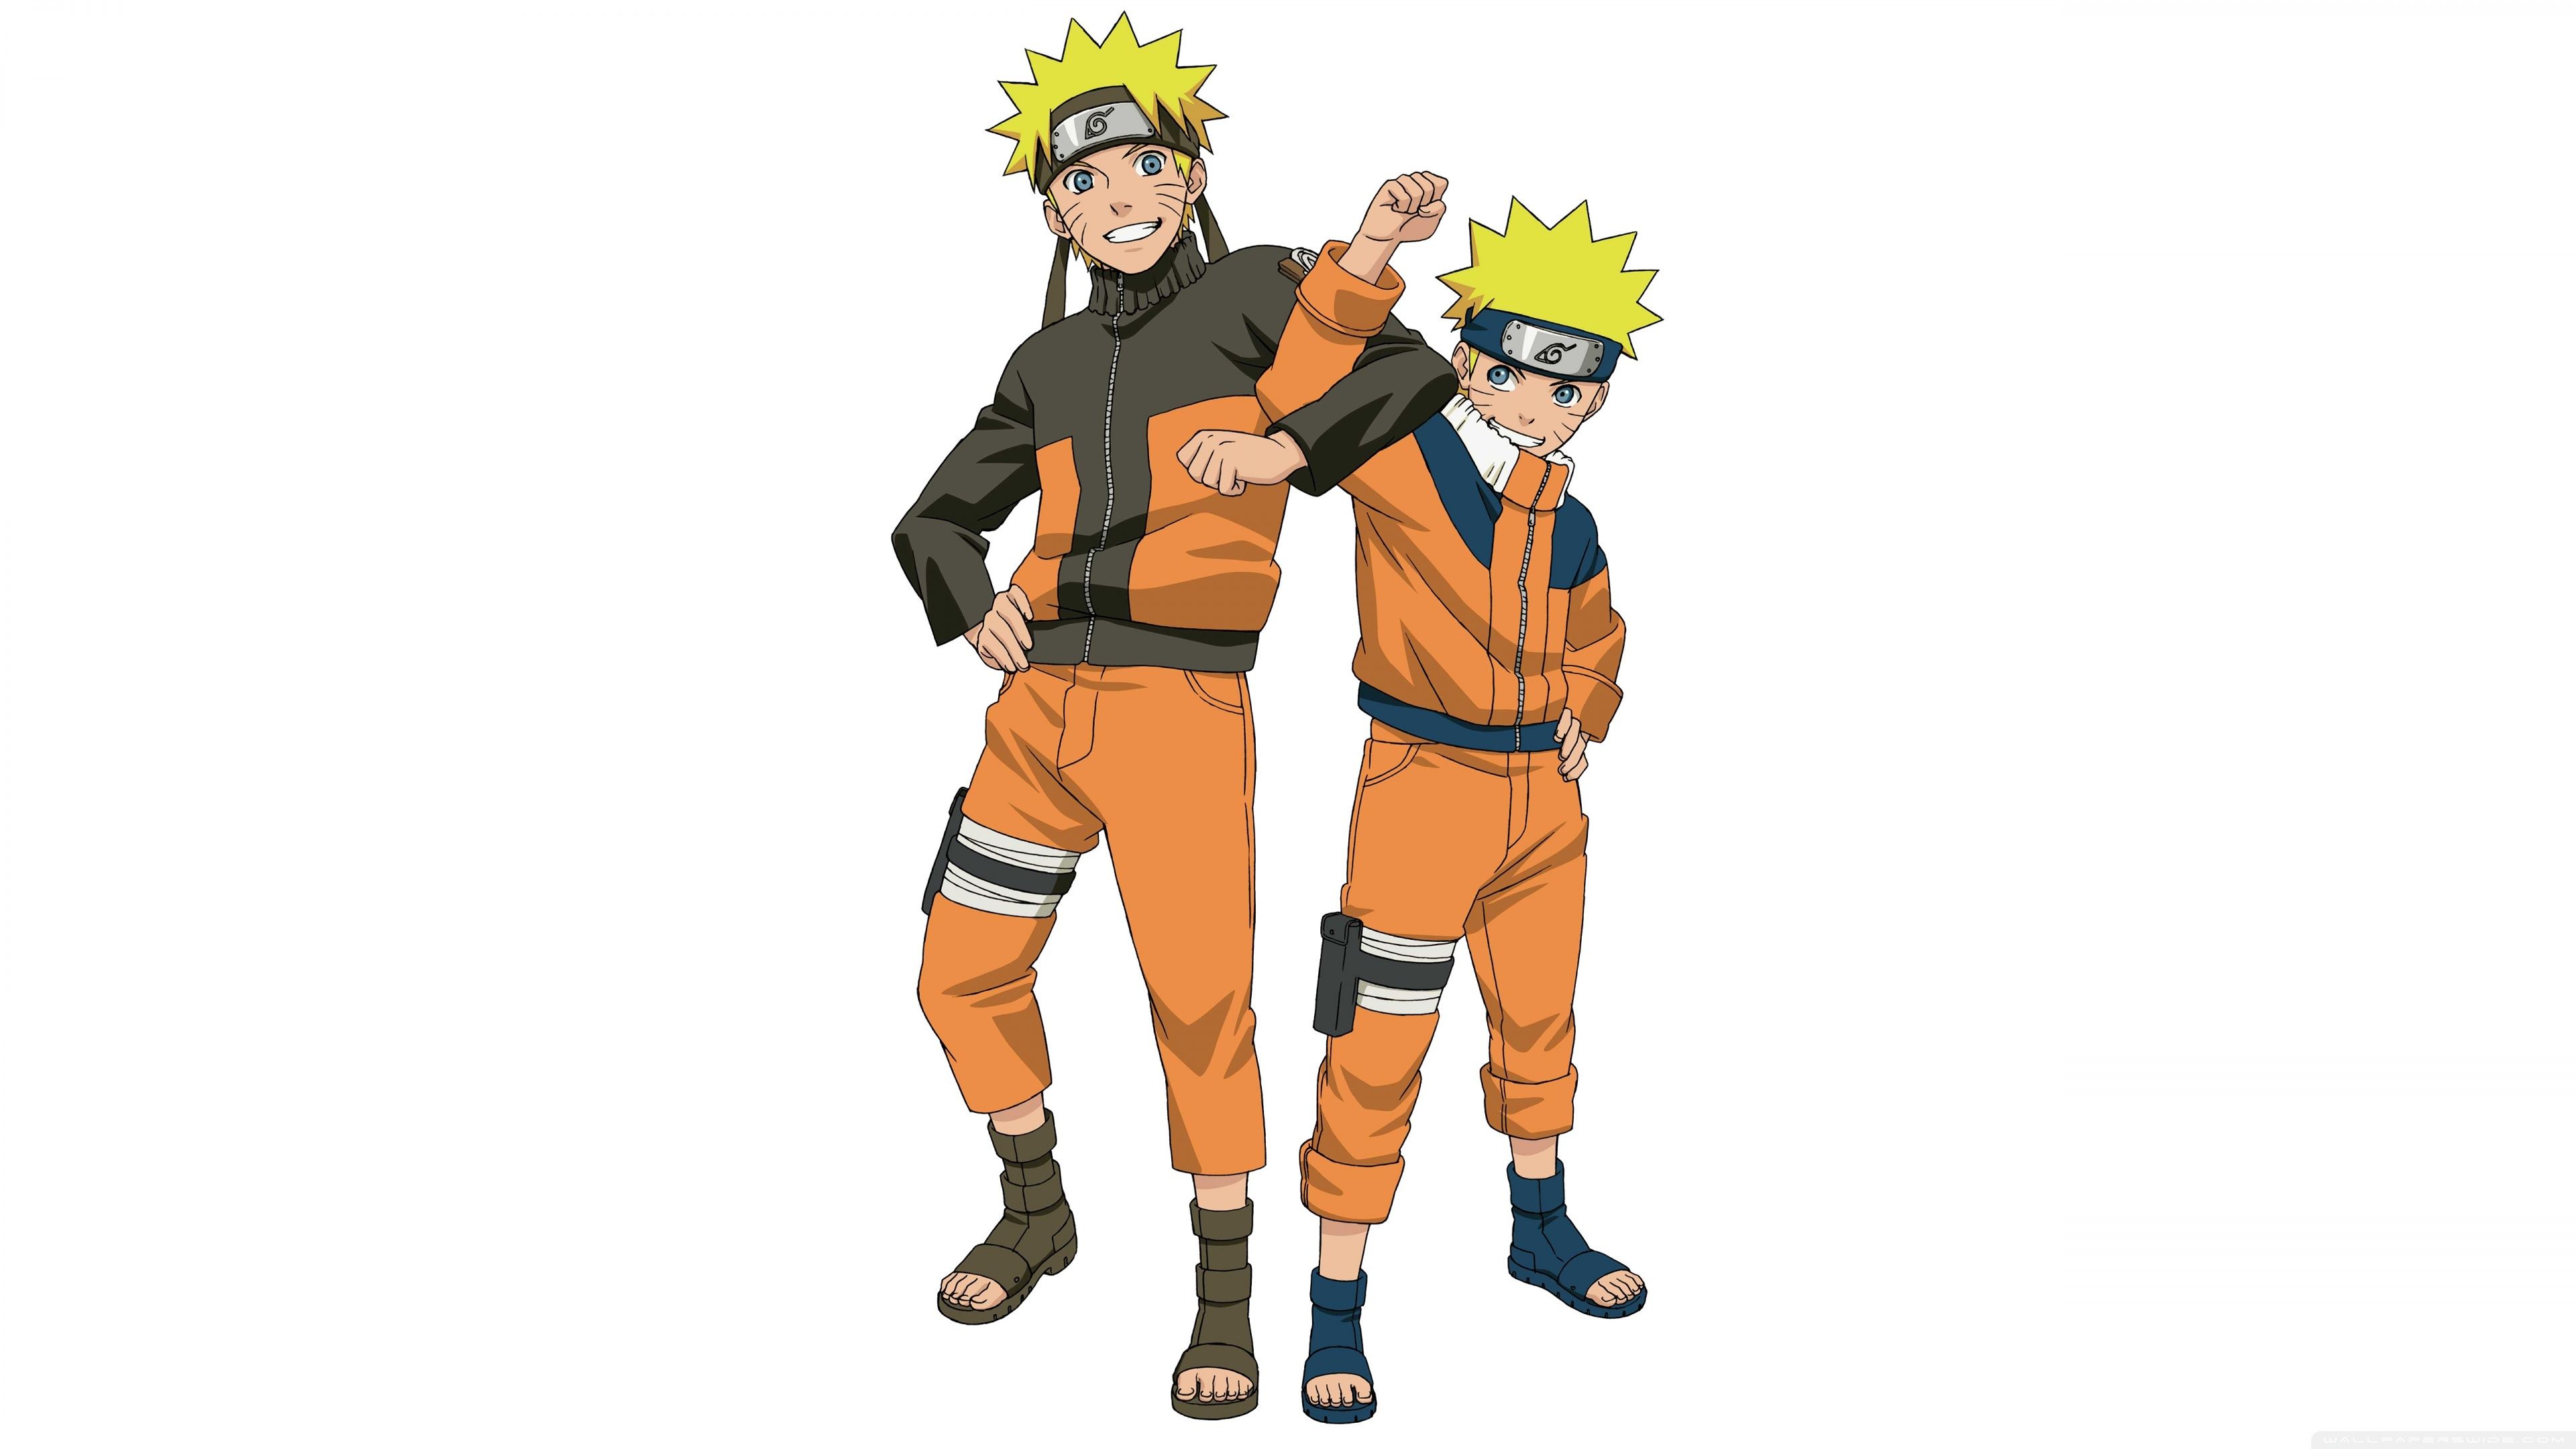 Naruto Anime 4K Wallpaper in jpg format for free download